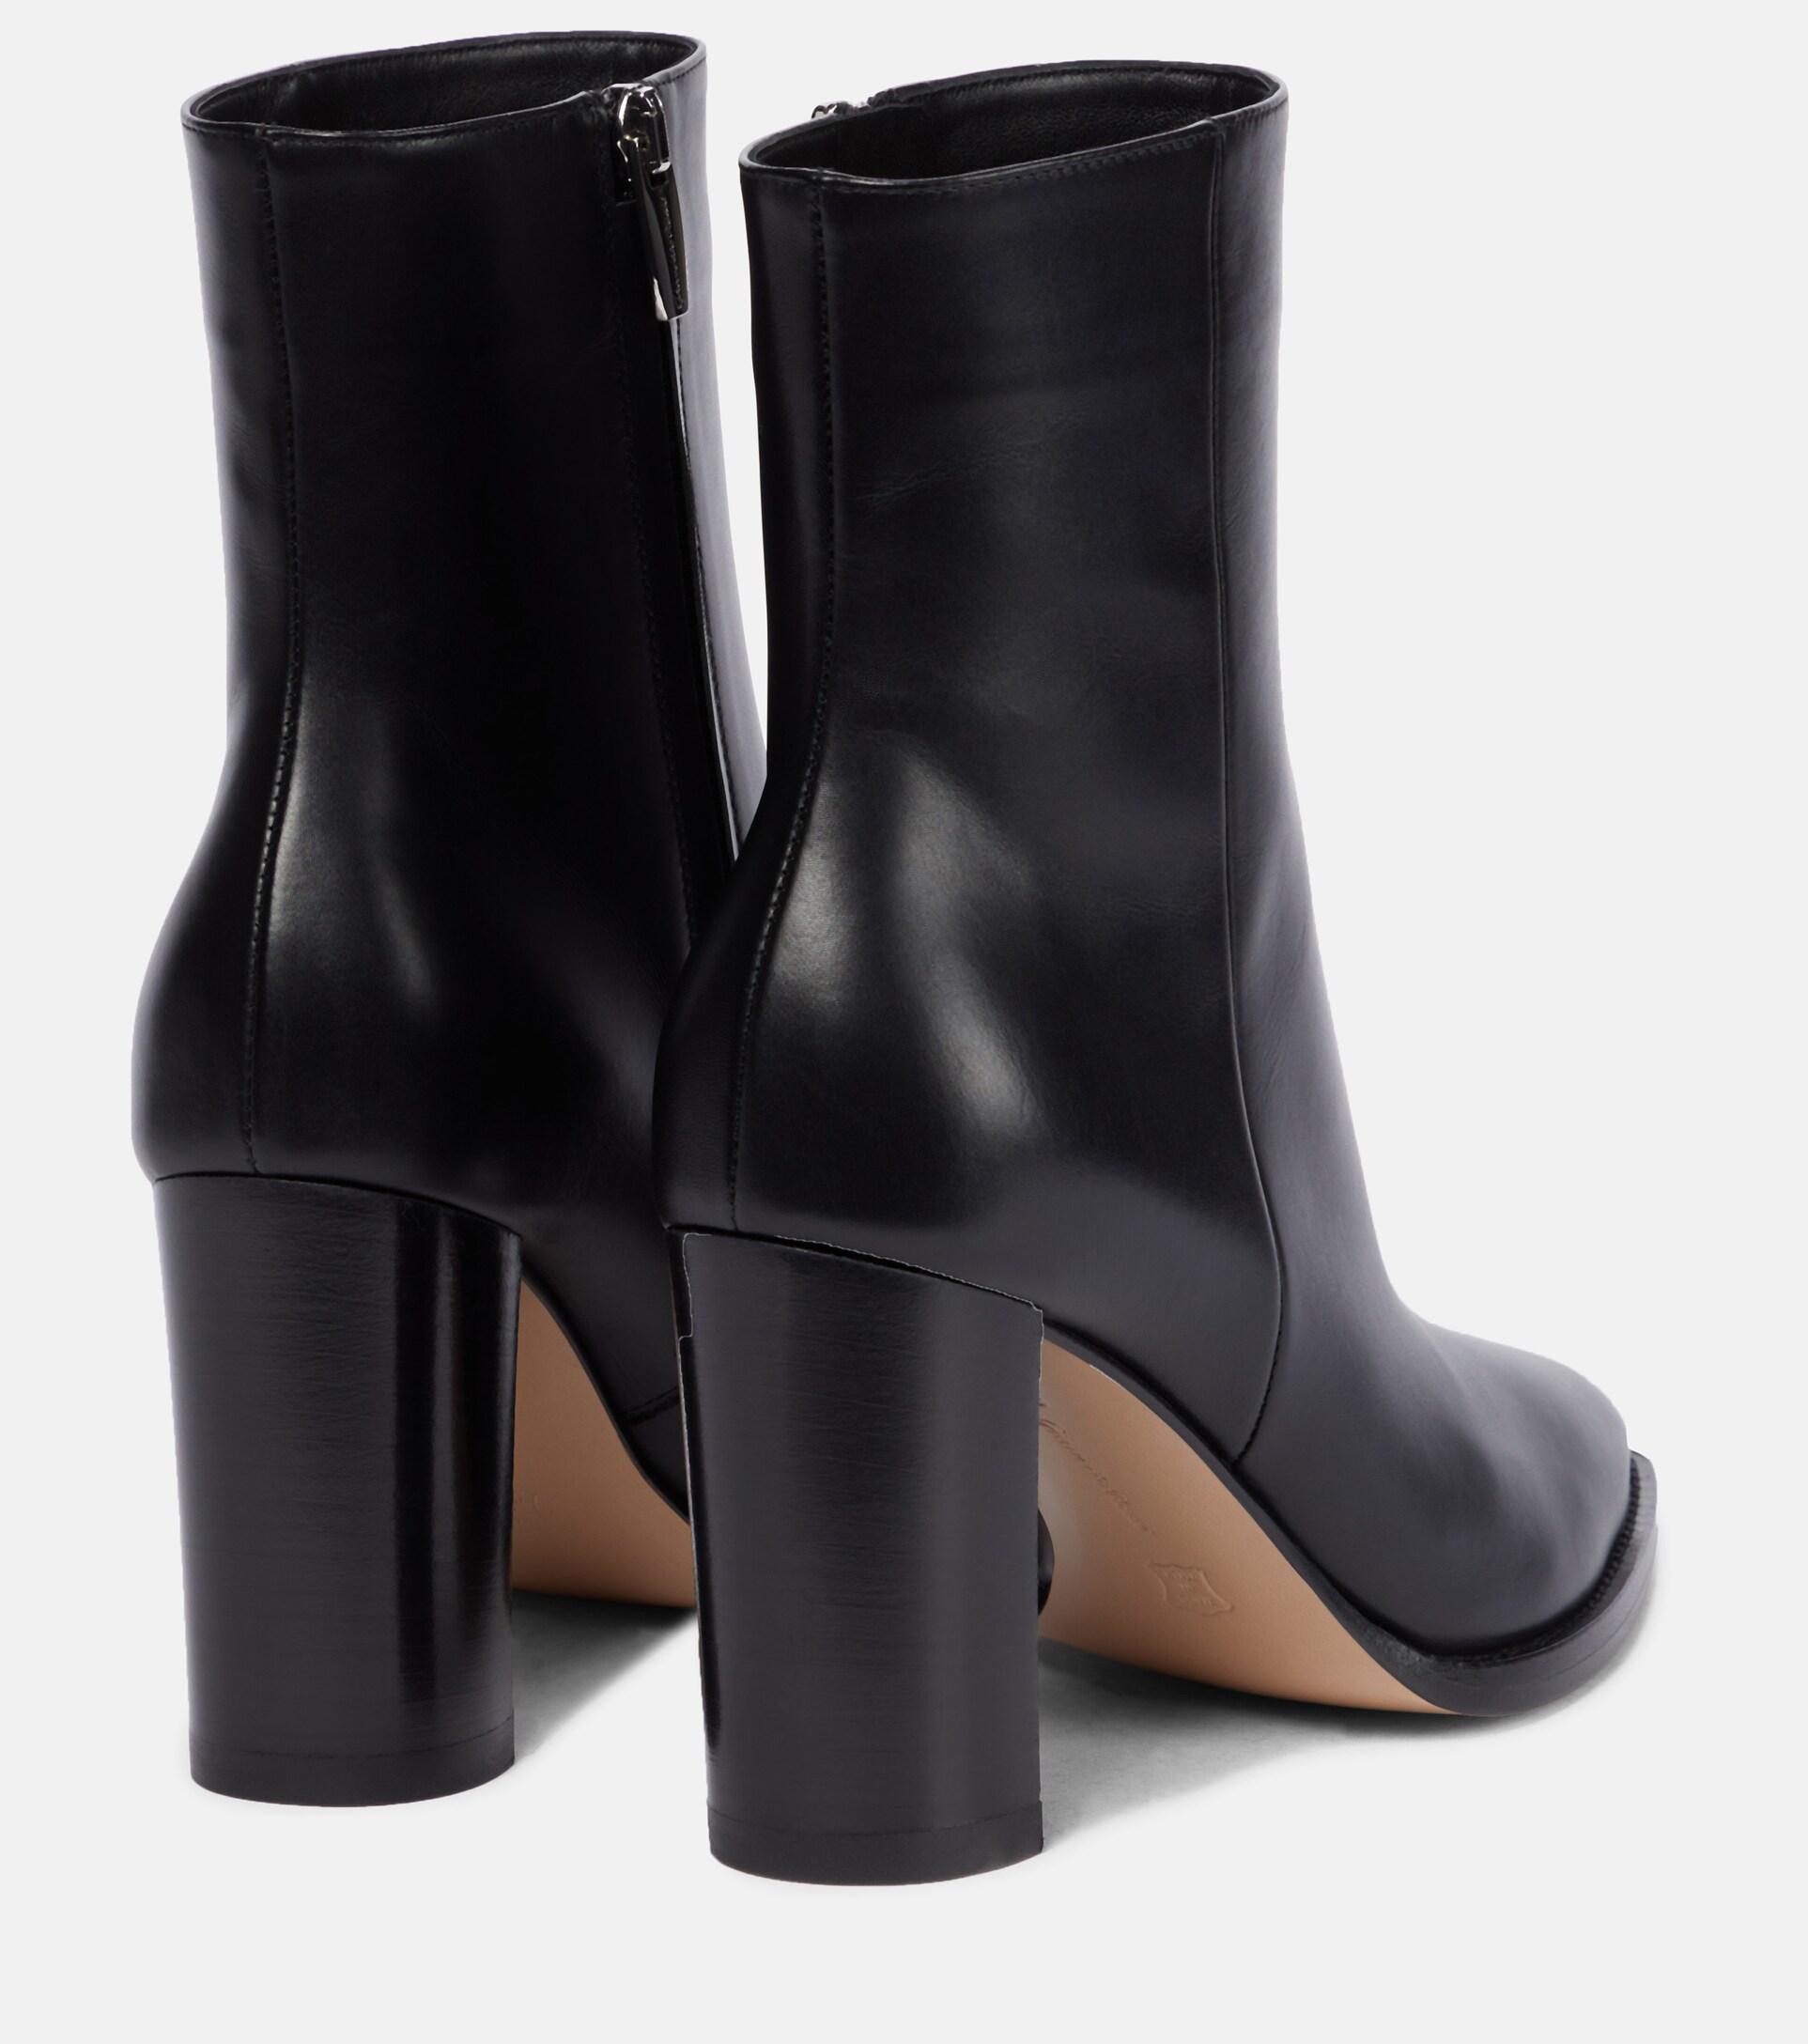 Gianvito Rossi River 85 Leather Ankle Boots in Black | Lyst